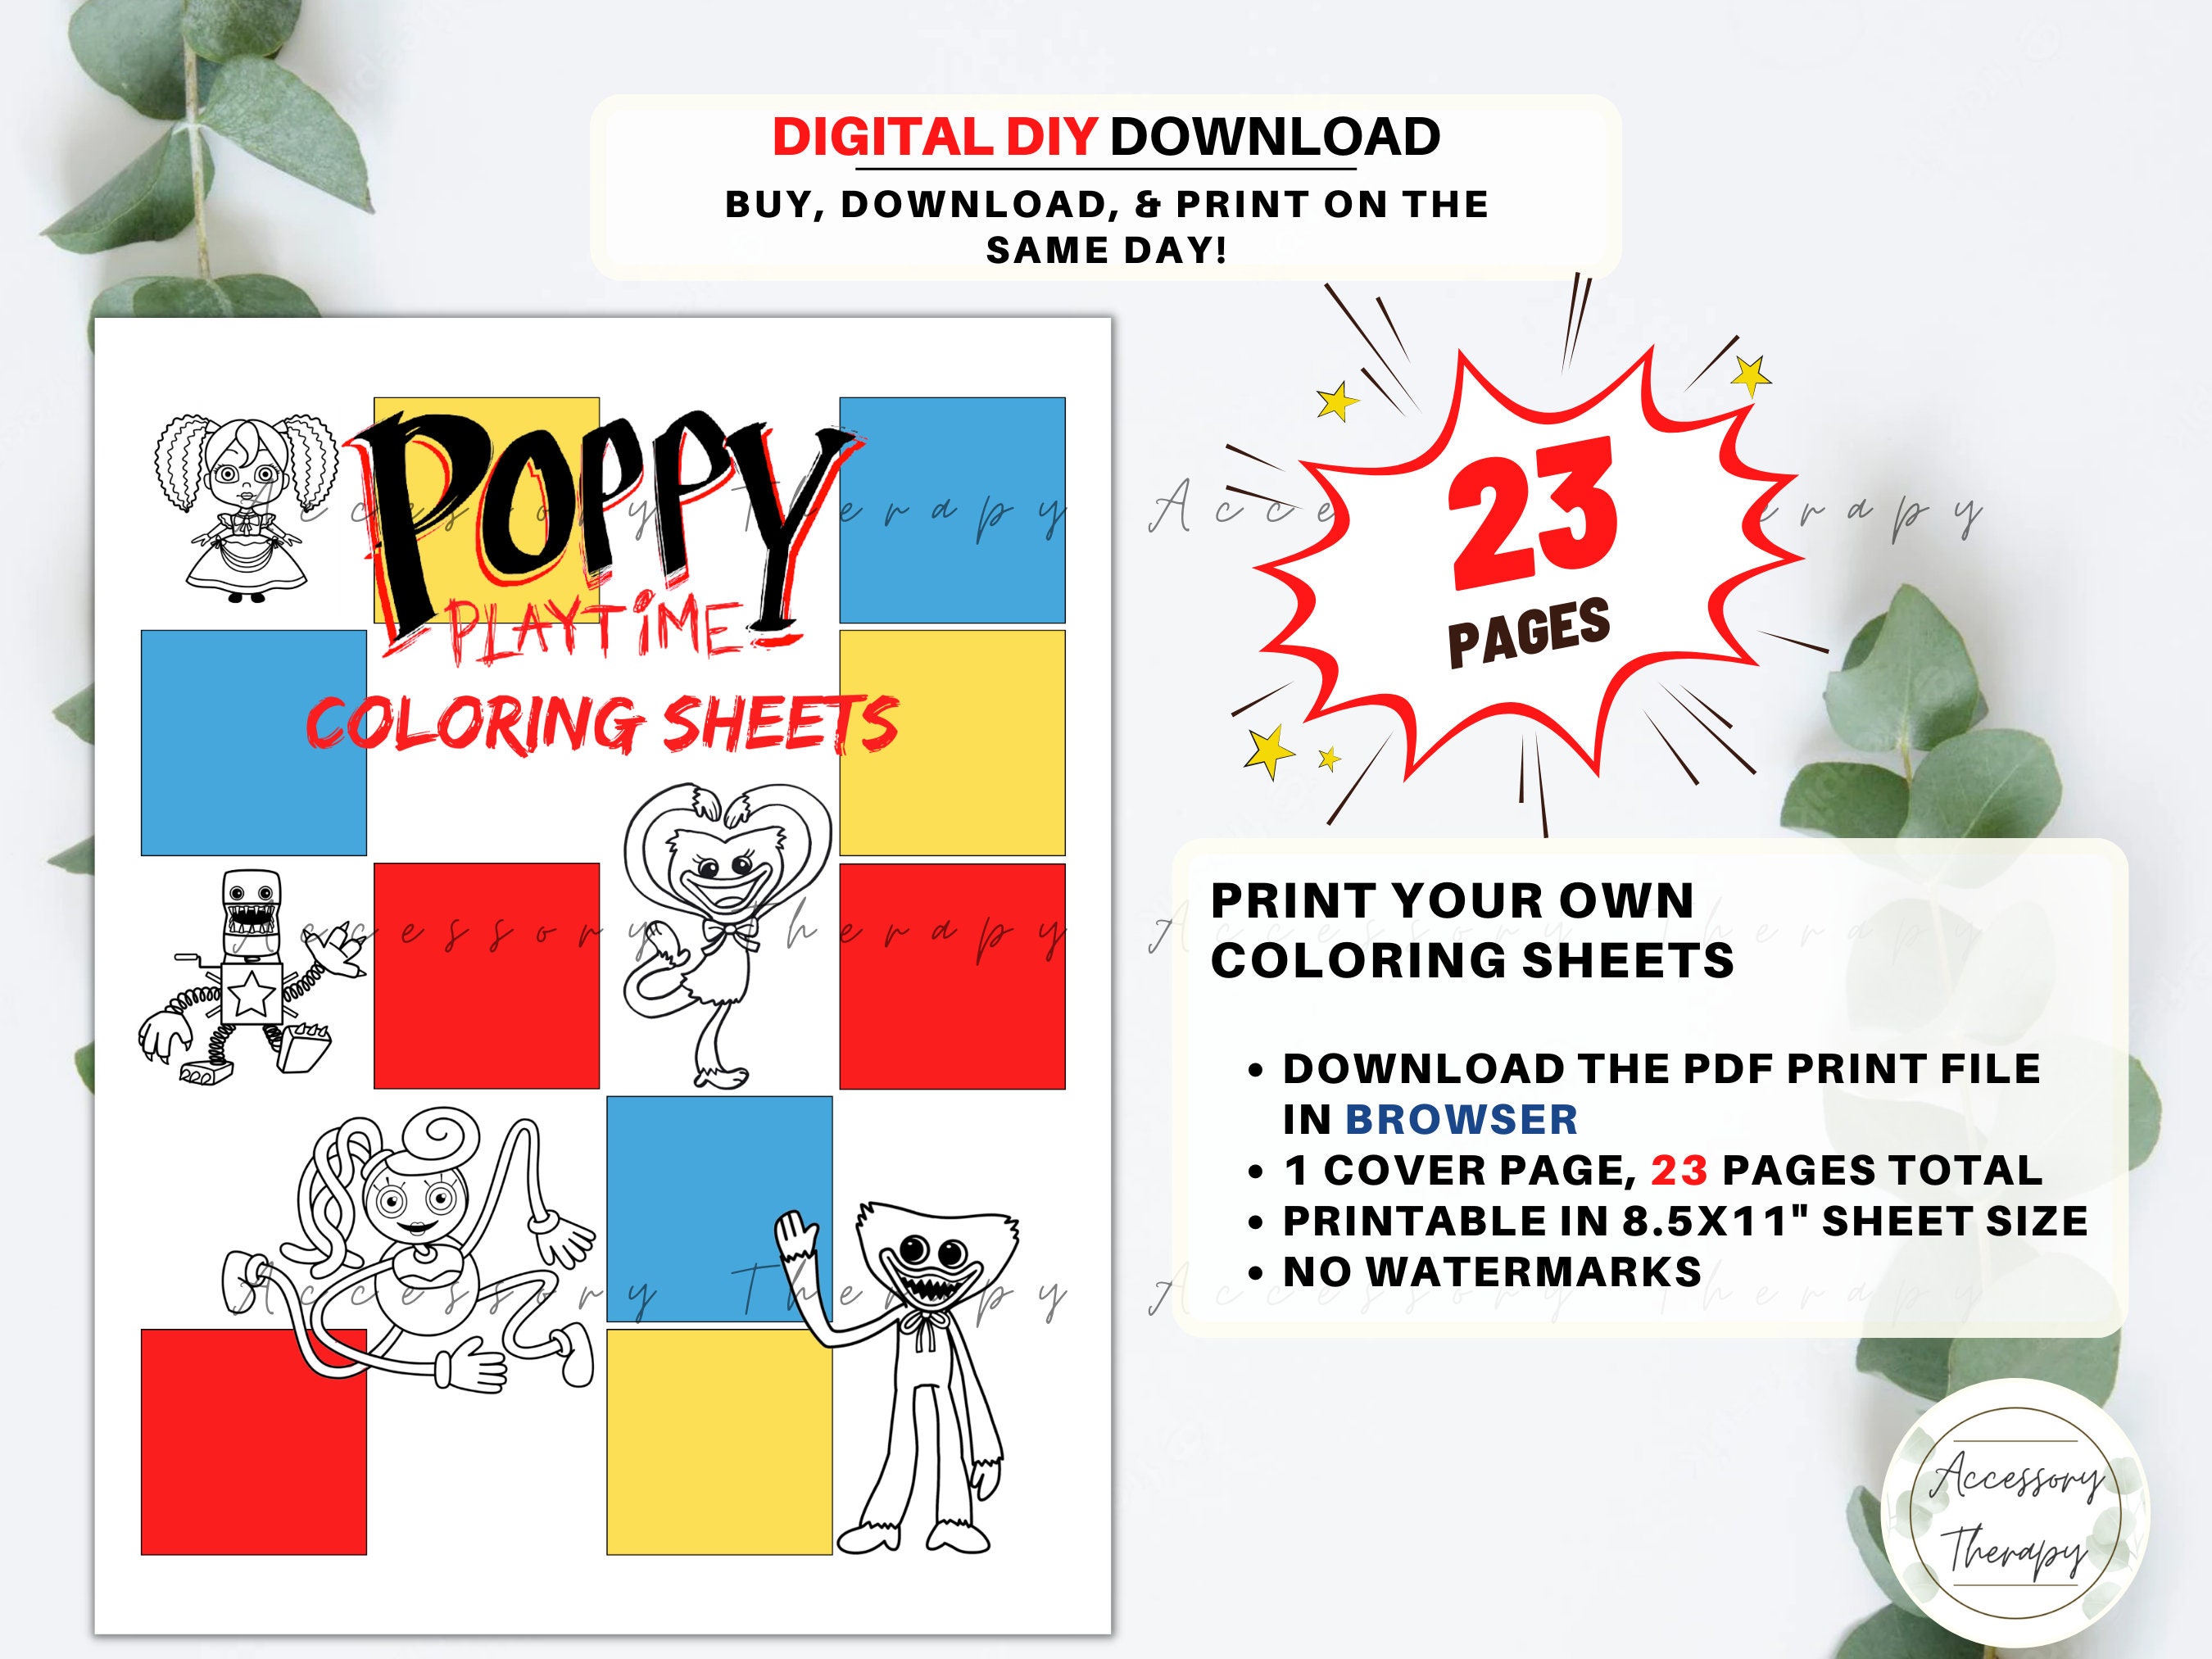 Poppy Playtime Chapter 1 & 2 Coloring Book: Poppy Playtime Chapter 1 & 2  Coloring Book With Over 100 Beautiful Coloring Pages For Everyone Who Loves   - Helps To Reduce Stress